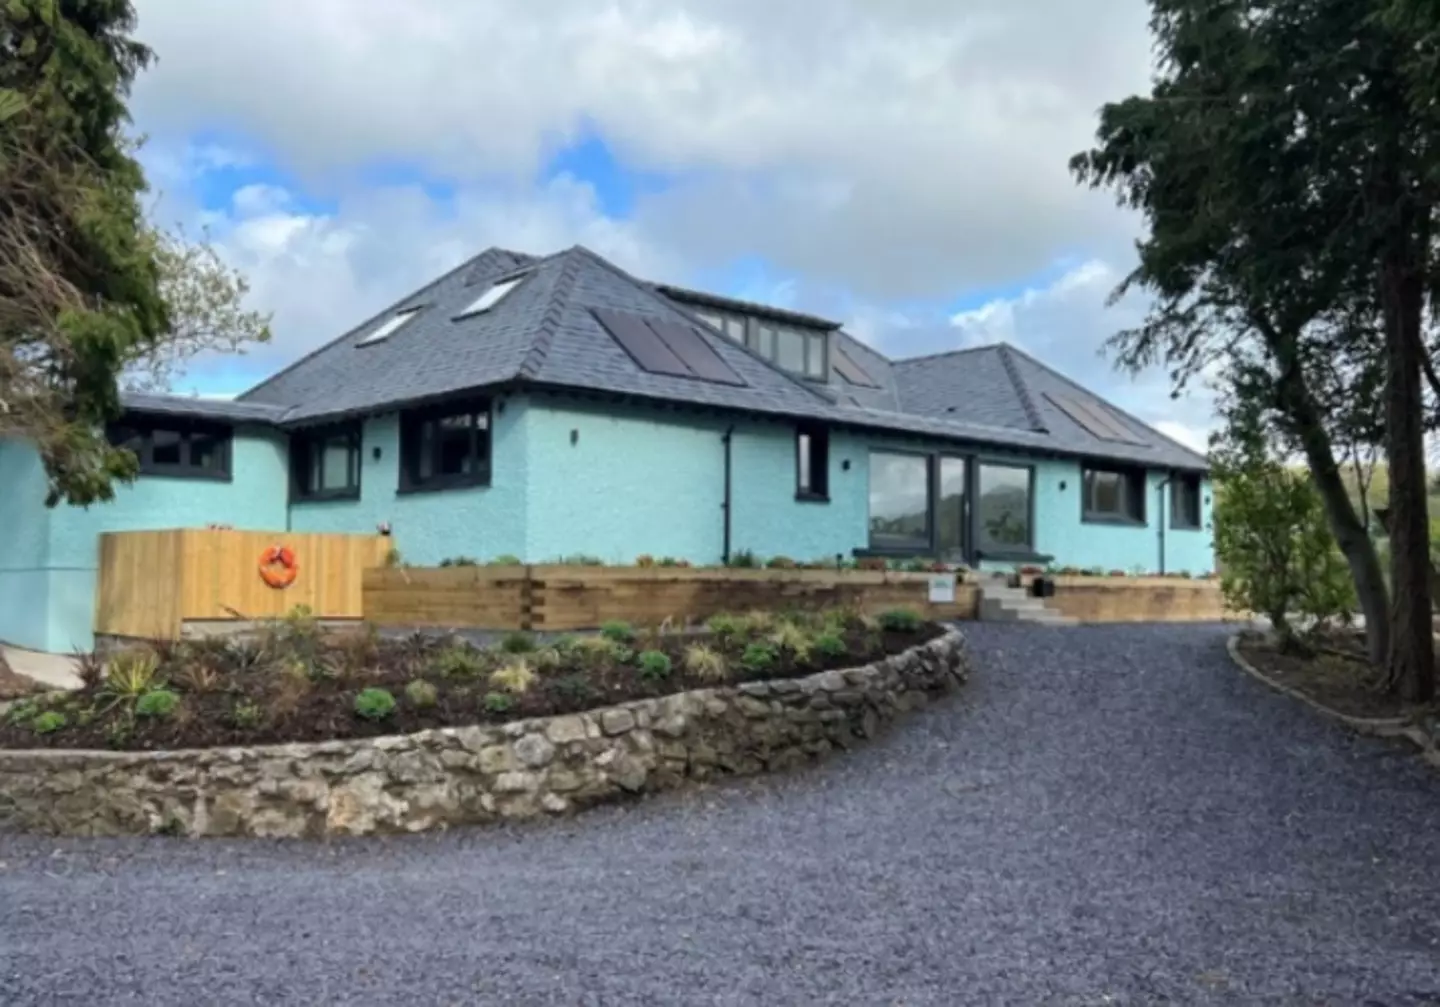 The island's new owners ended up renovating a property into a six bed home and holiday let. (Wales News Service)